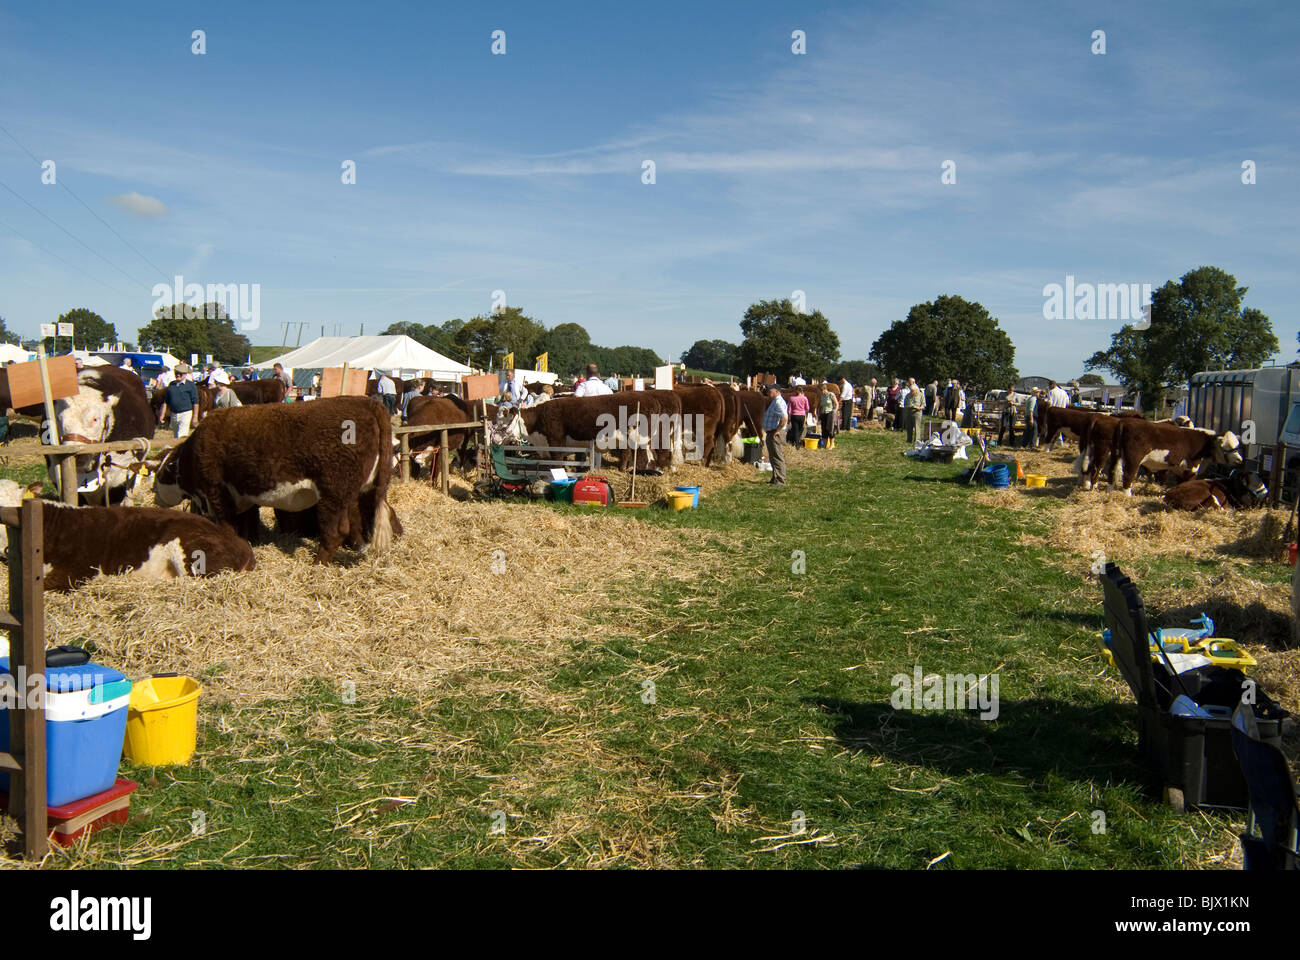 Hereford cattle awaiting entry to the show ring at Kington Agricultural Show Herefordshire Stock Photo